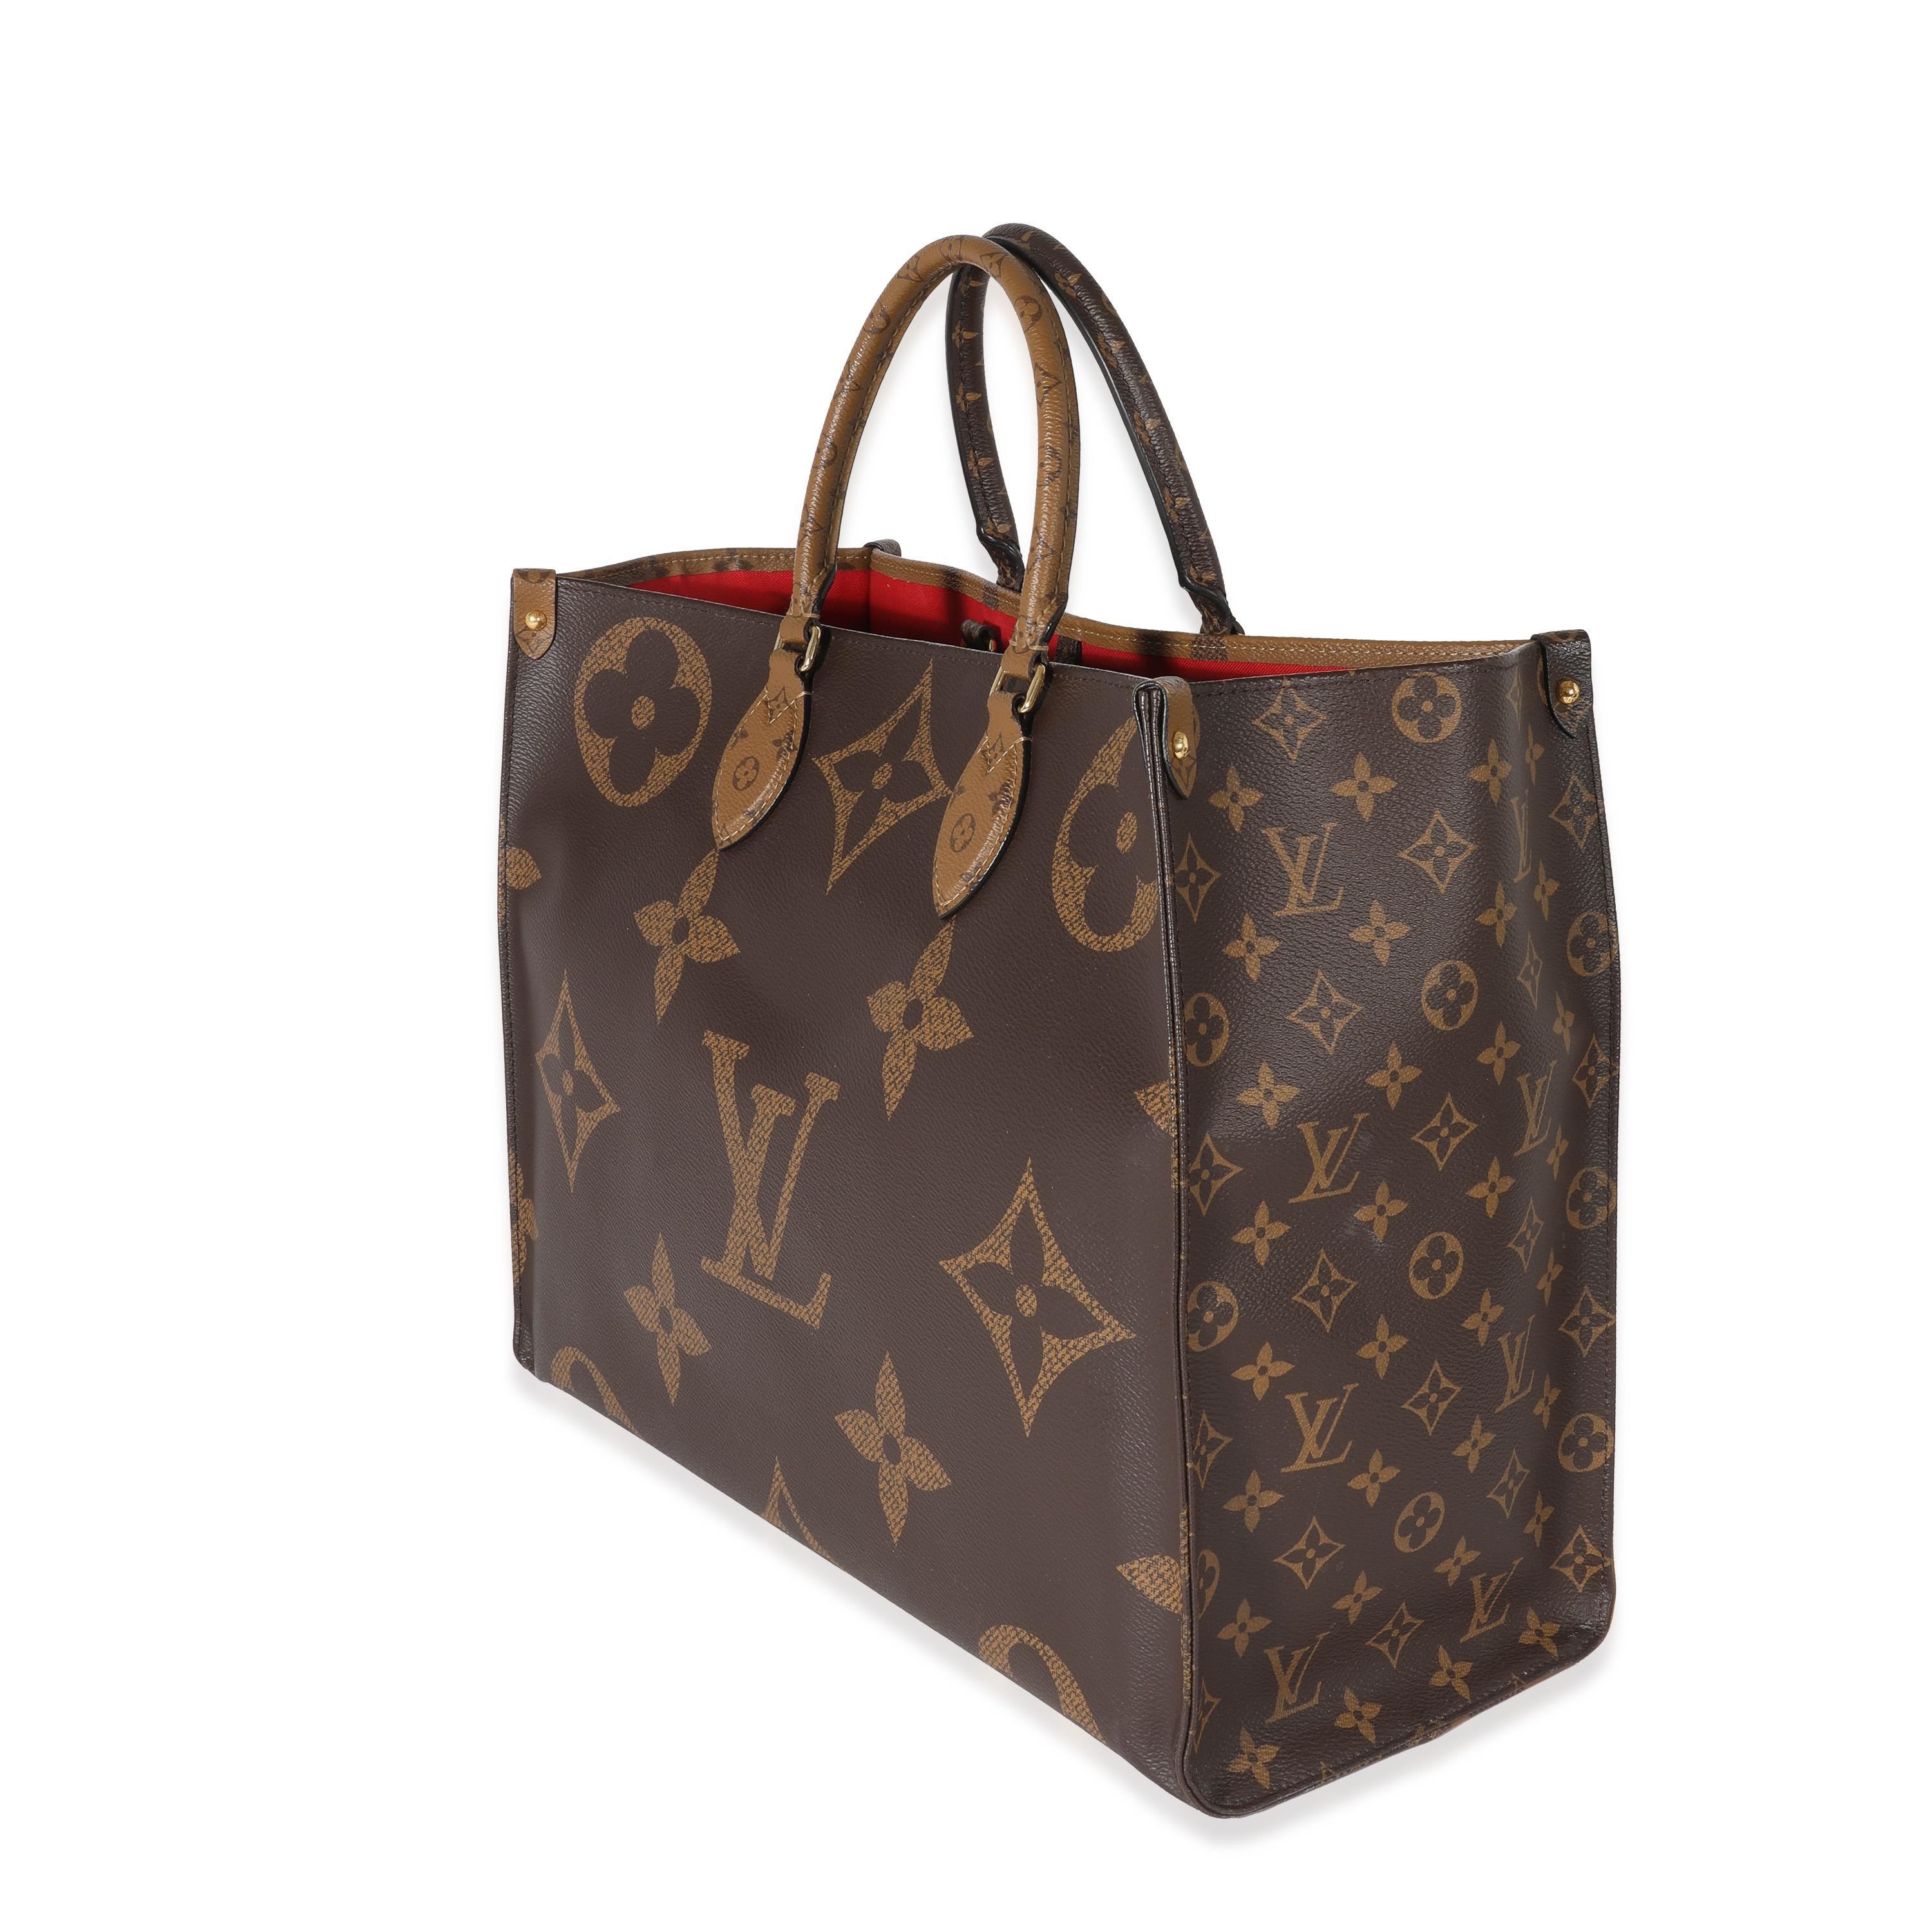 Listing Title: Louis Vuitton Reverse Giant Monogram Canvas OnTheGo GM
SKU: 131409
MSRP: 3250.00
Condition: Pre-owned 
Handbag Condition: Very Good
Condition Comments: Item is in very good condition with minor signs of wear. Exterior corner scuffing